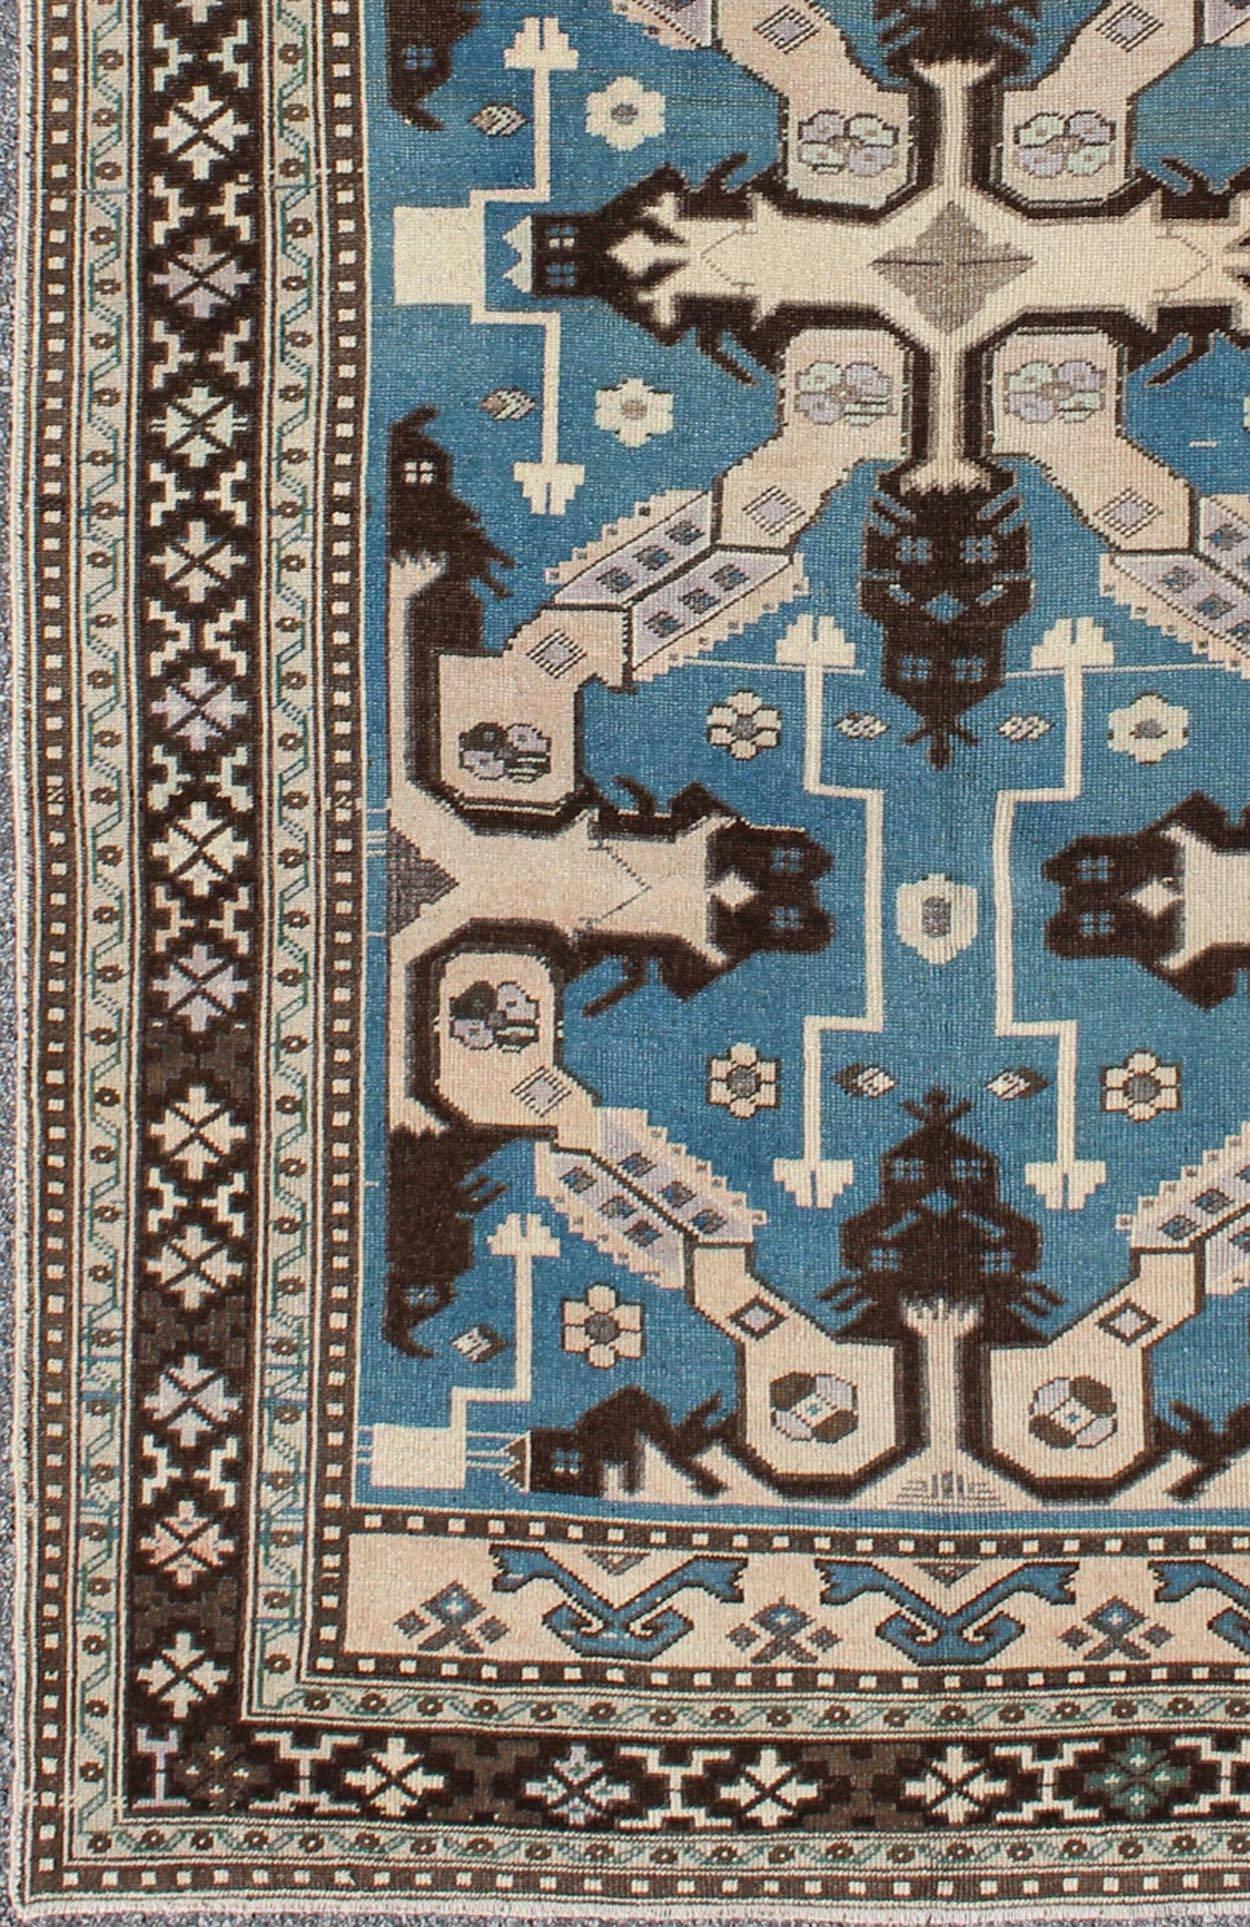 This stunning Turkish rug features a large geometric design and a unique color combination. Set on a steel blue background, this Turkish rug has variegated colors of brown, taupe and other neutral hues, rendering a magnificent fit for a wide variety